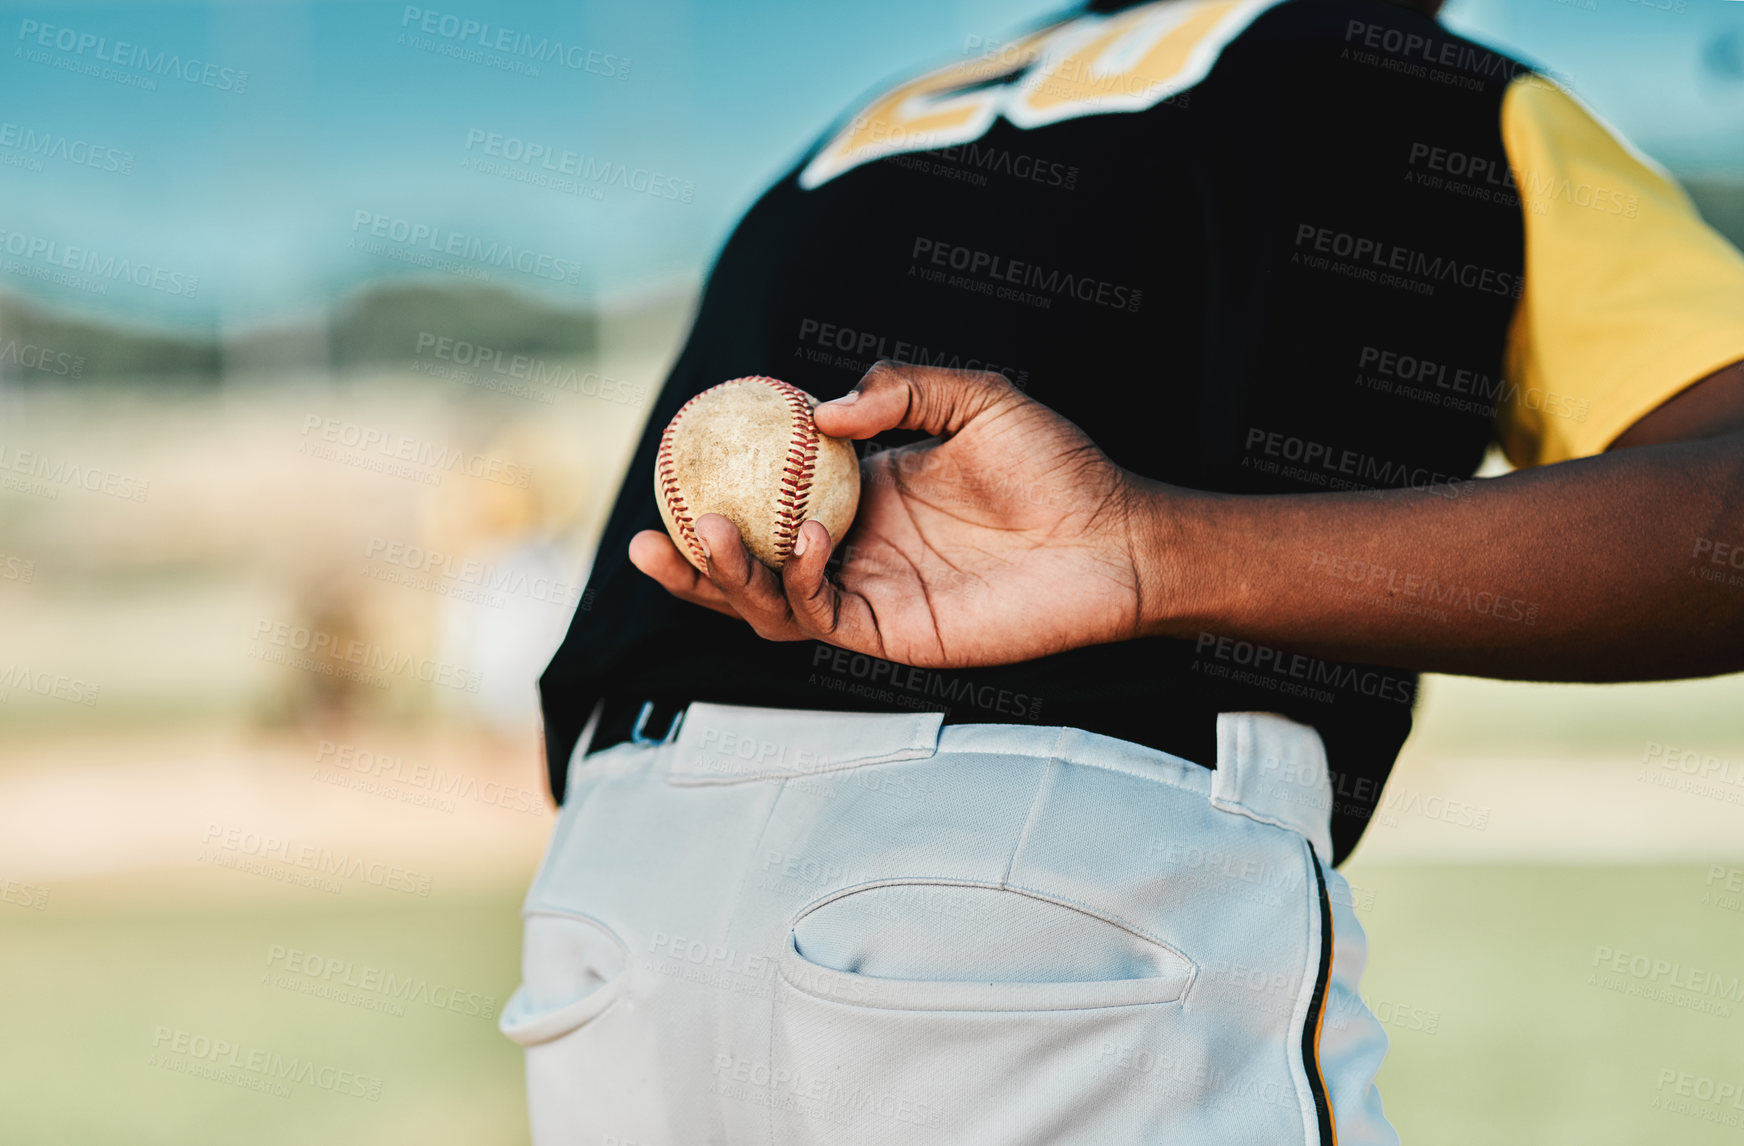 Buy stock photo Rearview shot of a baseball player holding the ball behind his back